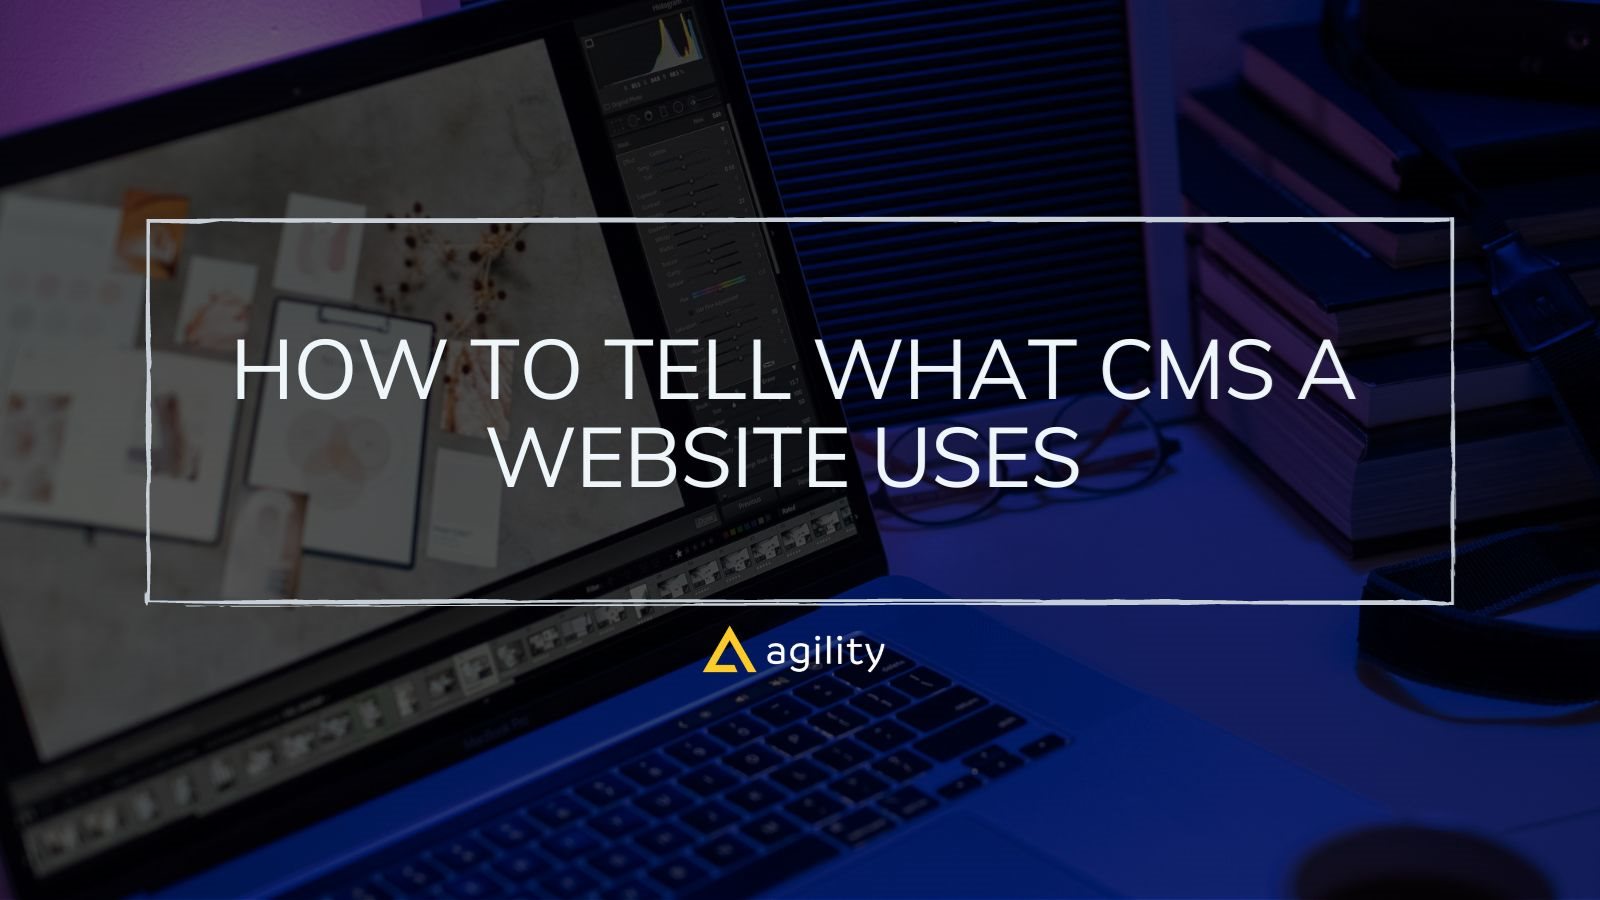 How to tell what CMS a website uses